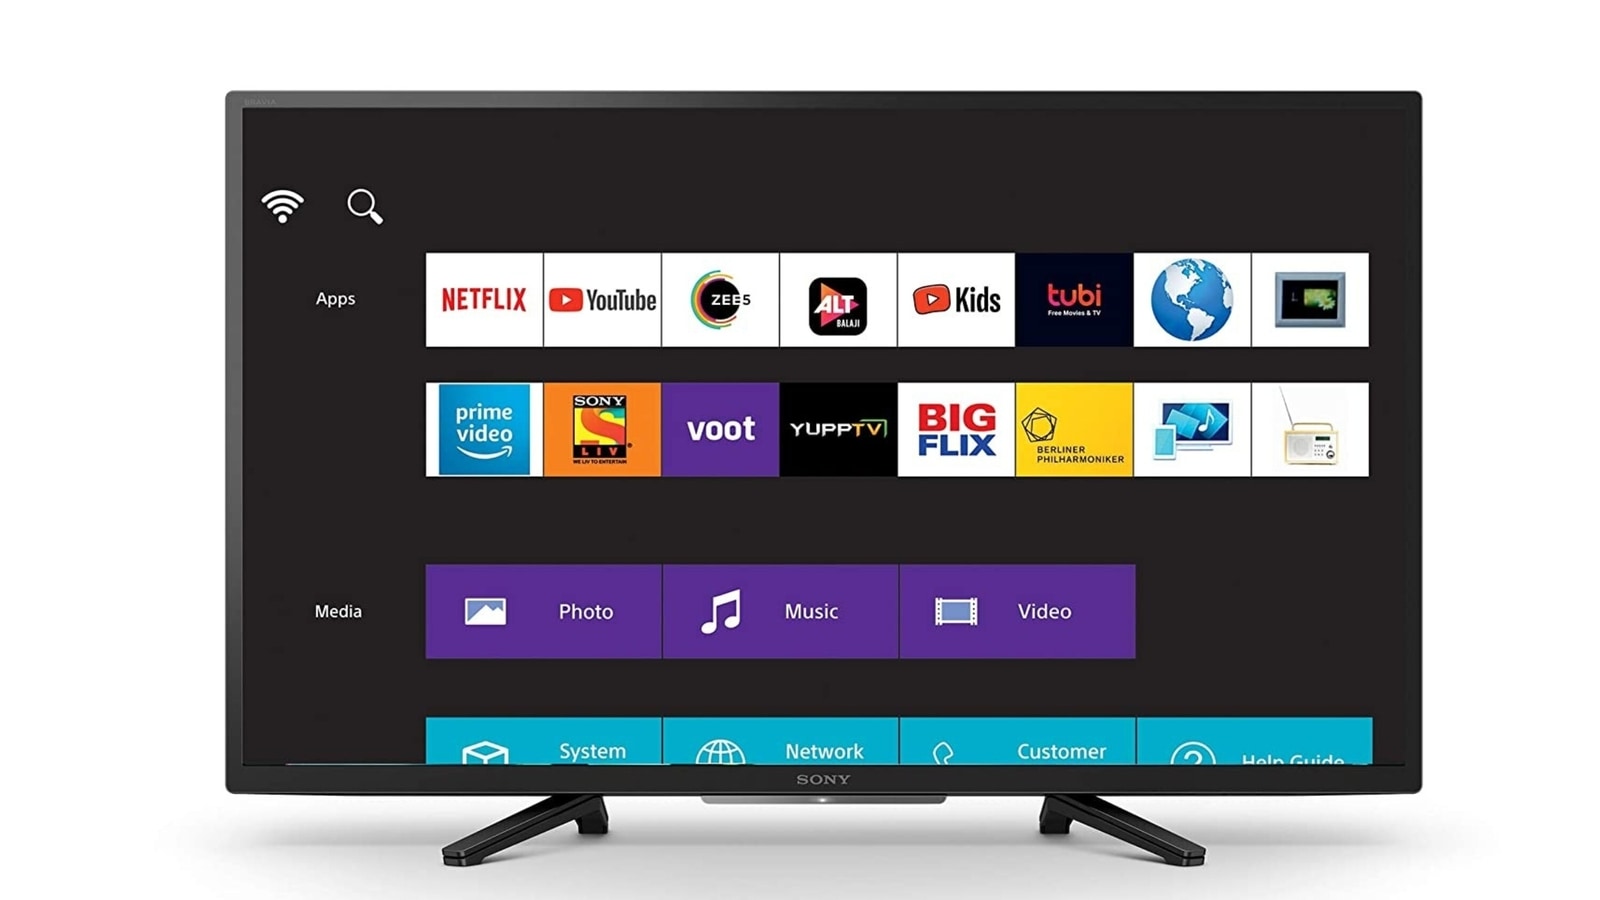 Sony Bravia 32-inch smart TV: Comprehensive review of smart